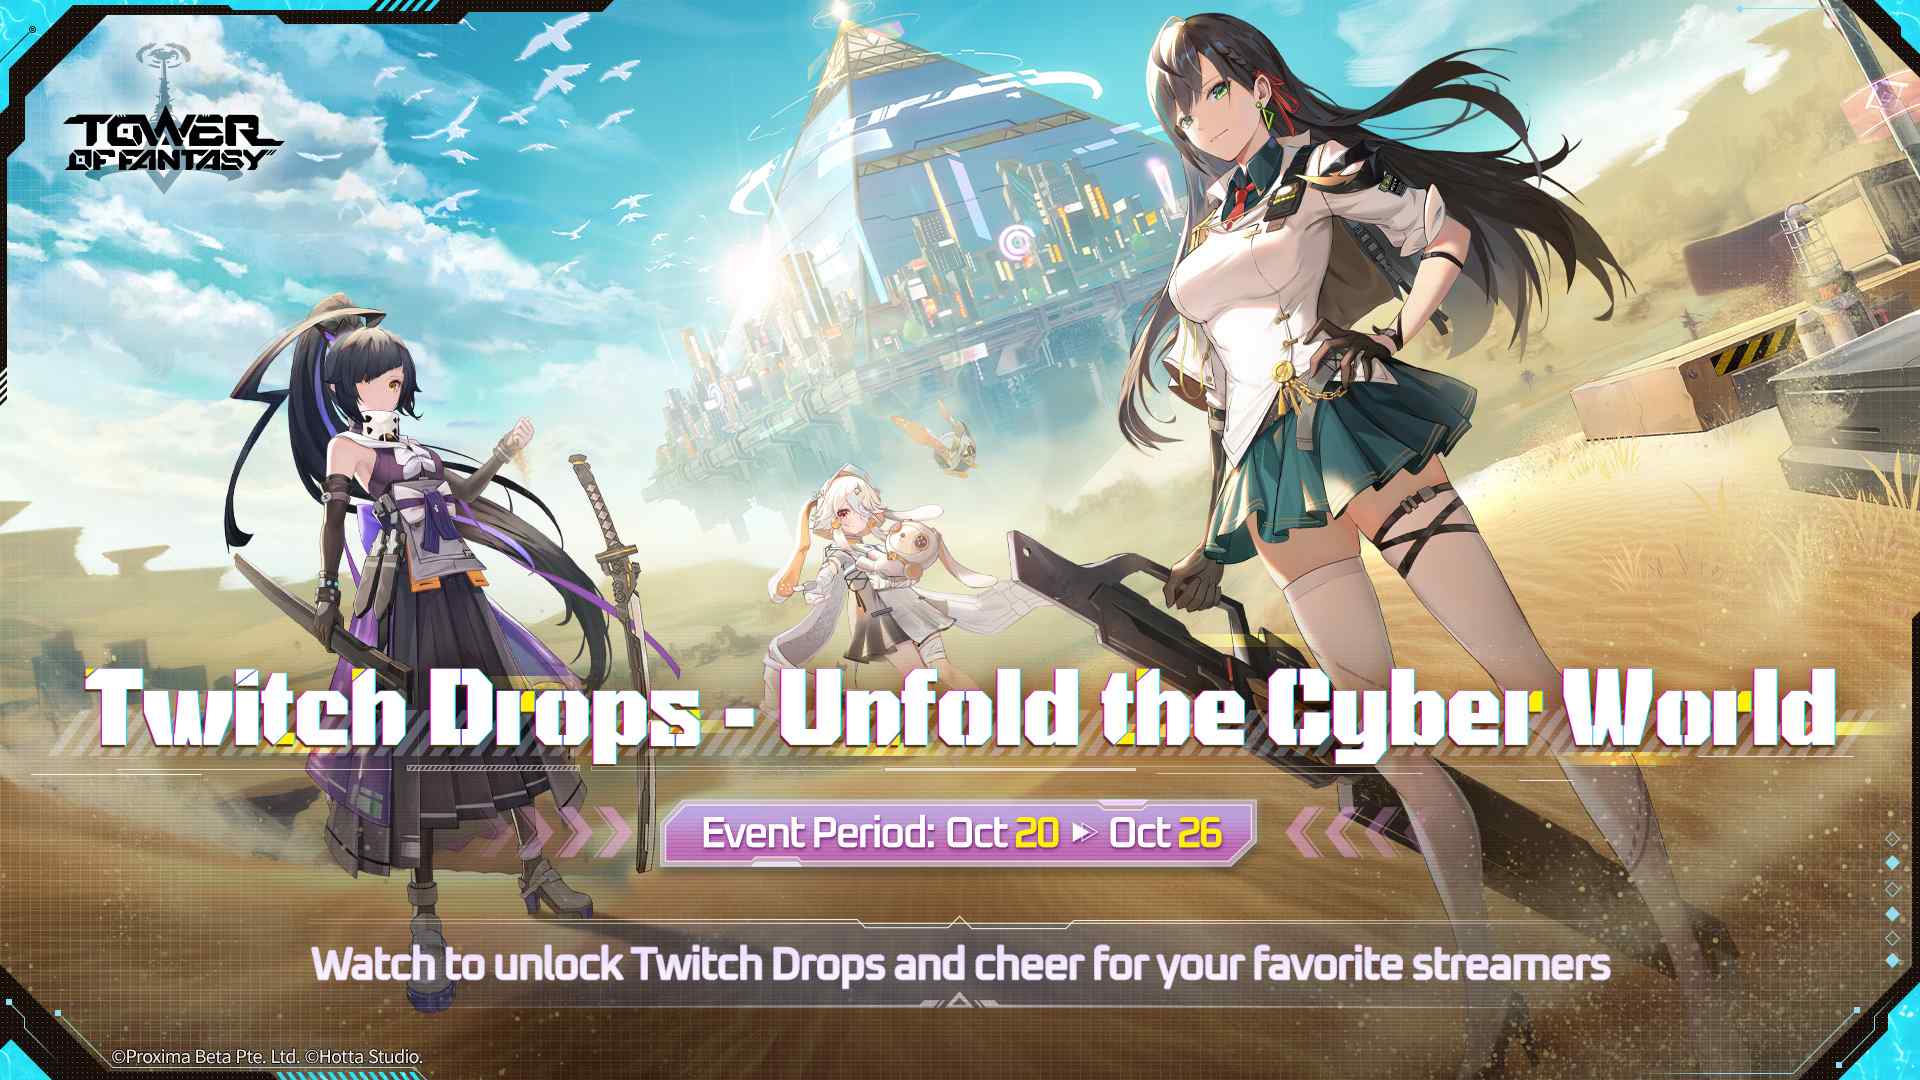 Tower of Fantasy_ Twitch drops - Unfold the Cyber World event